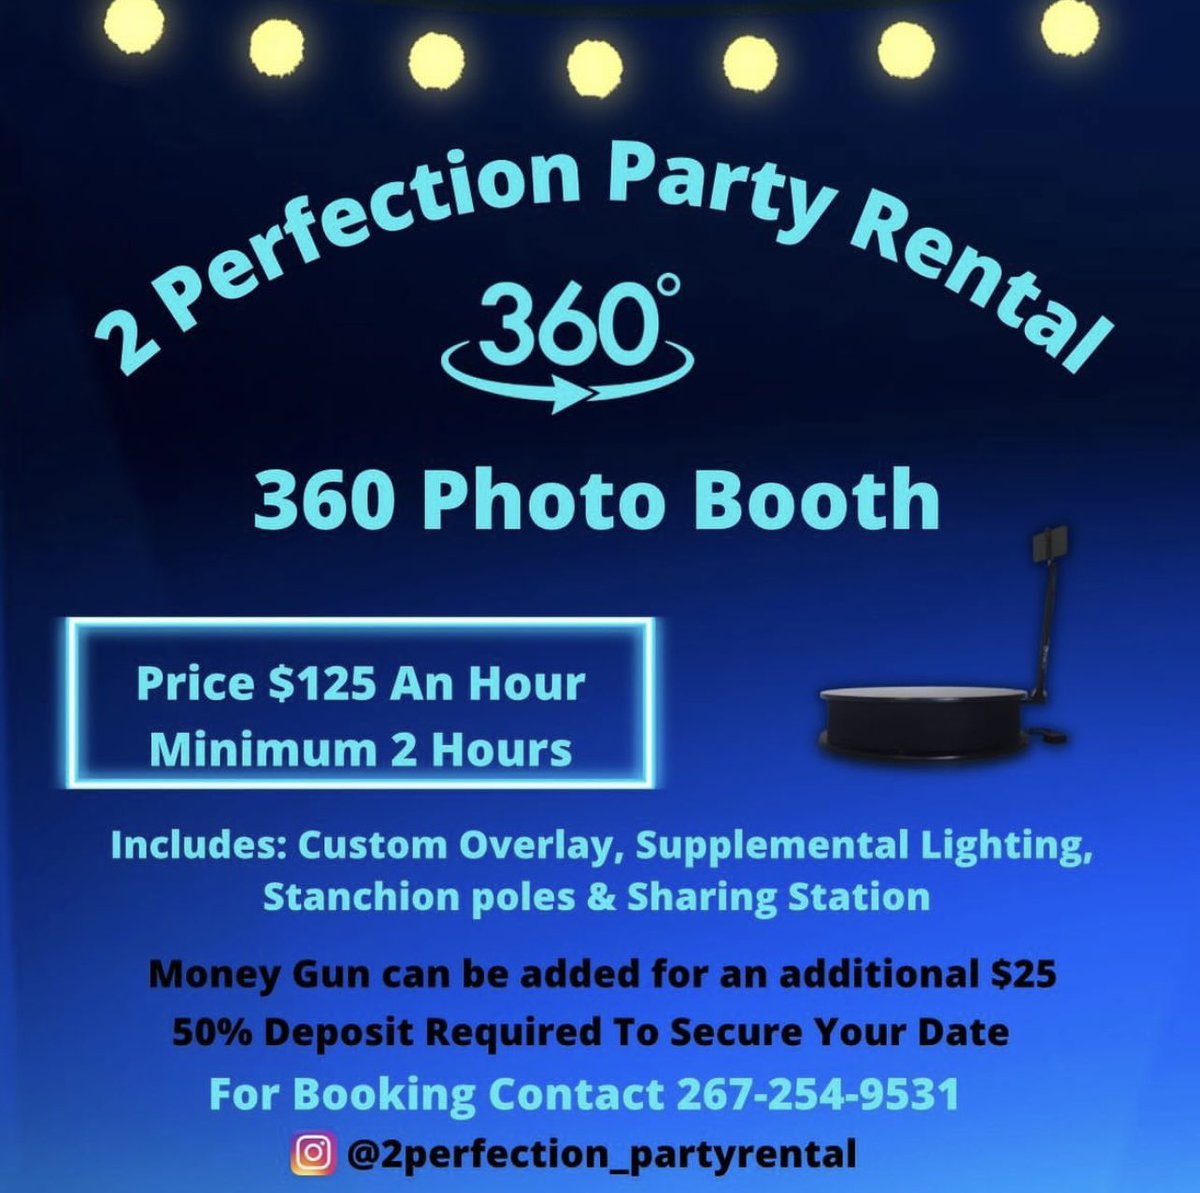 Book our 360 Photo booth for your next event #photobooth #360machine #360photobooth #360spinner #360video #partyrental #entertainment #events #prom  #promsendoff #graduation #graduationparty #birthdayparty #wedding #babyshowers #genderreveal #bookwithme #philly #nj #de